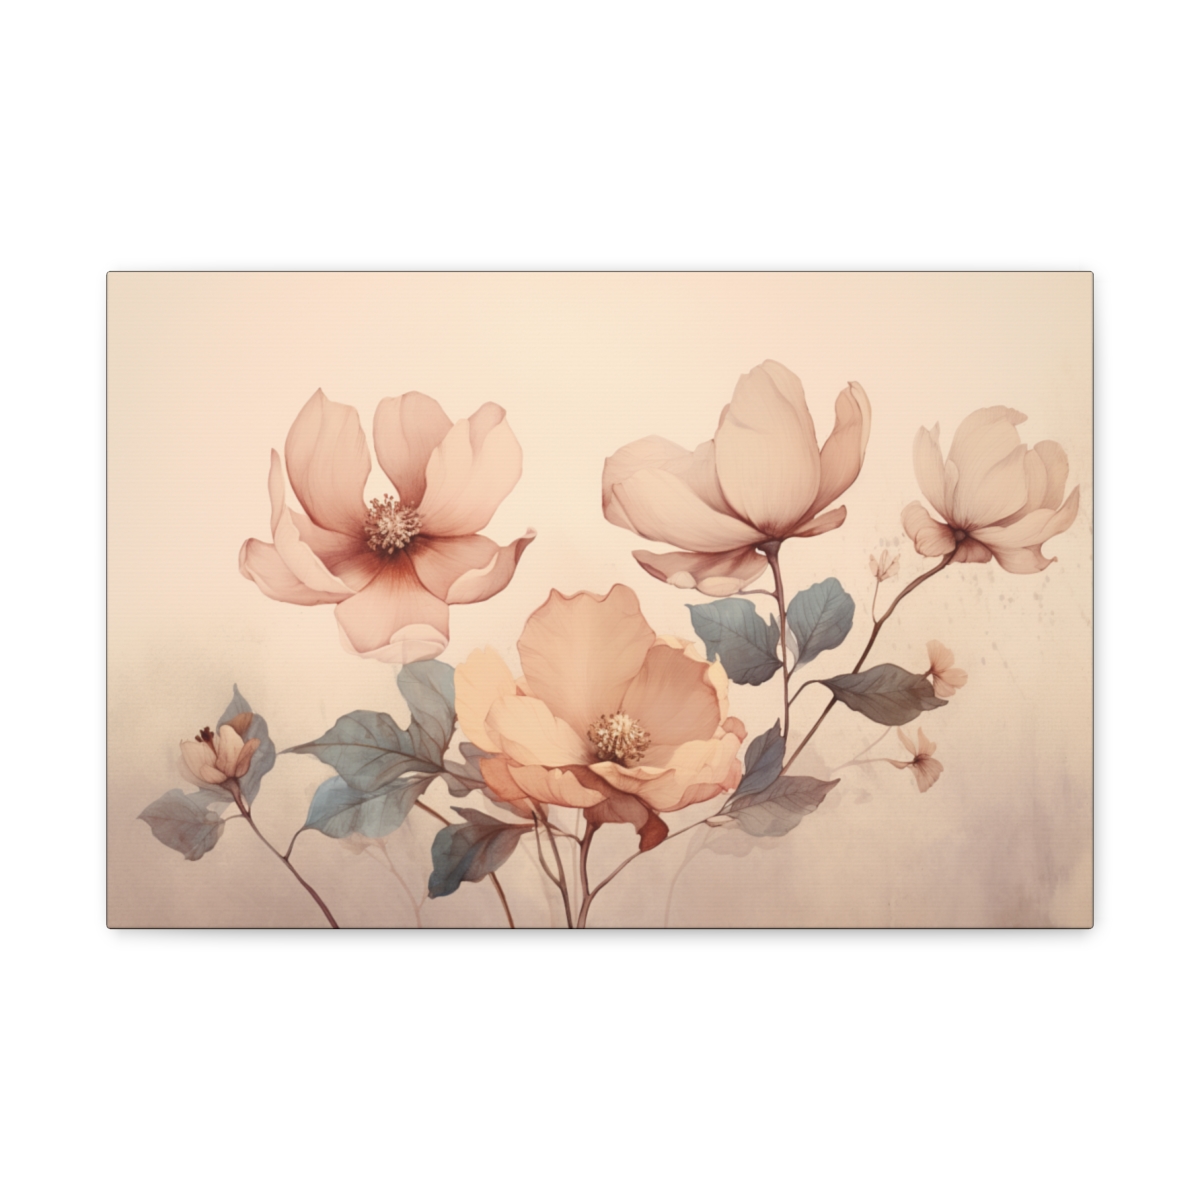 Vintage Flower Art: Blossoms And Feather